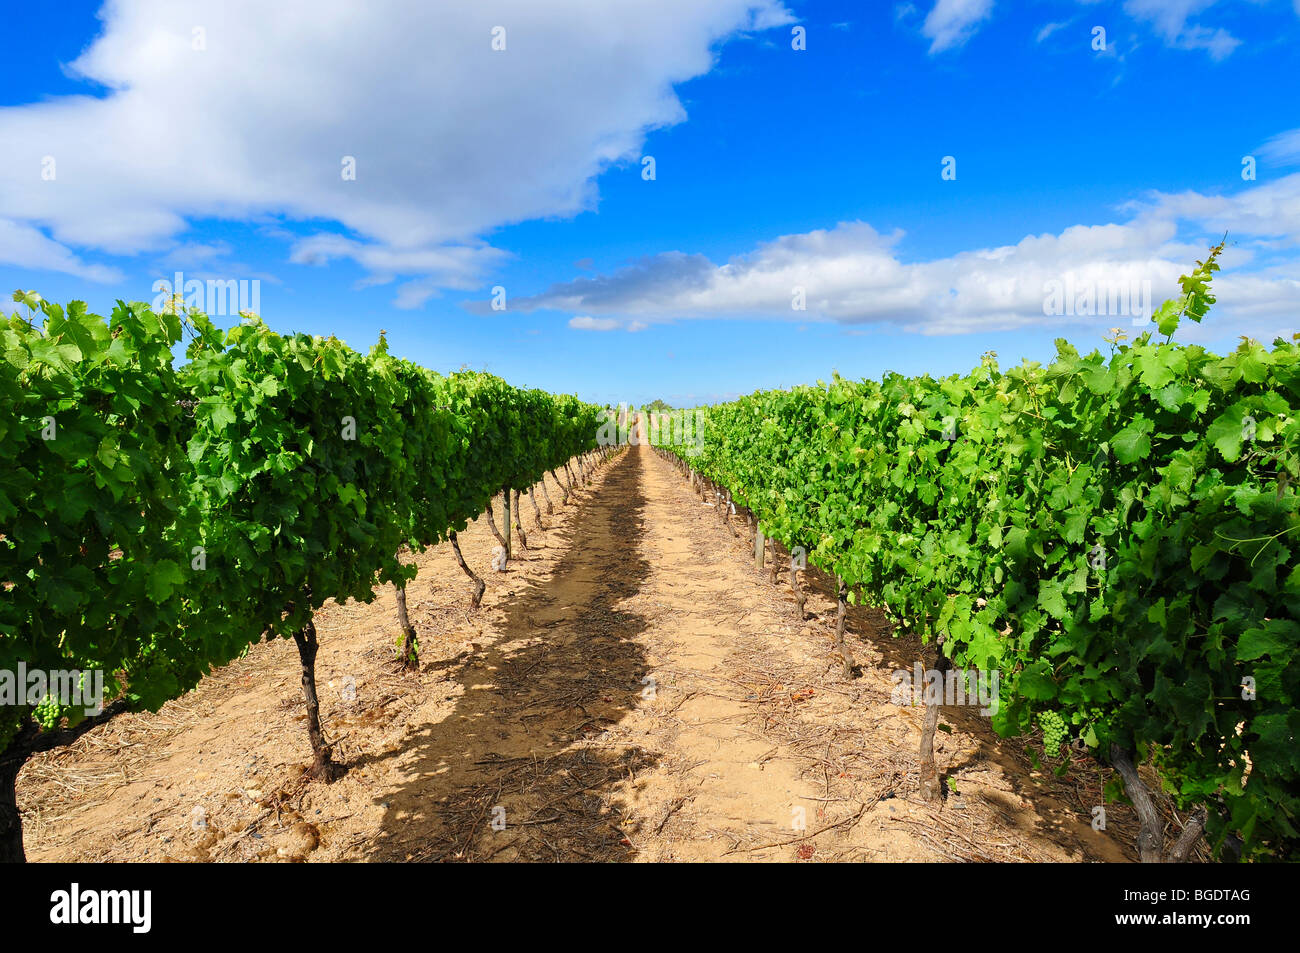 A landscape photograph of a row of vines within a Vineyard in Cape Town South Africa Stock Photo